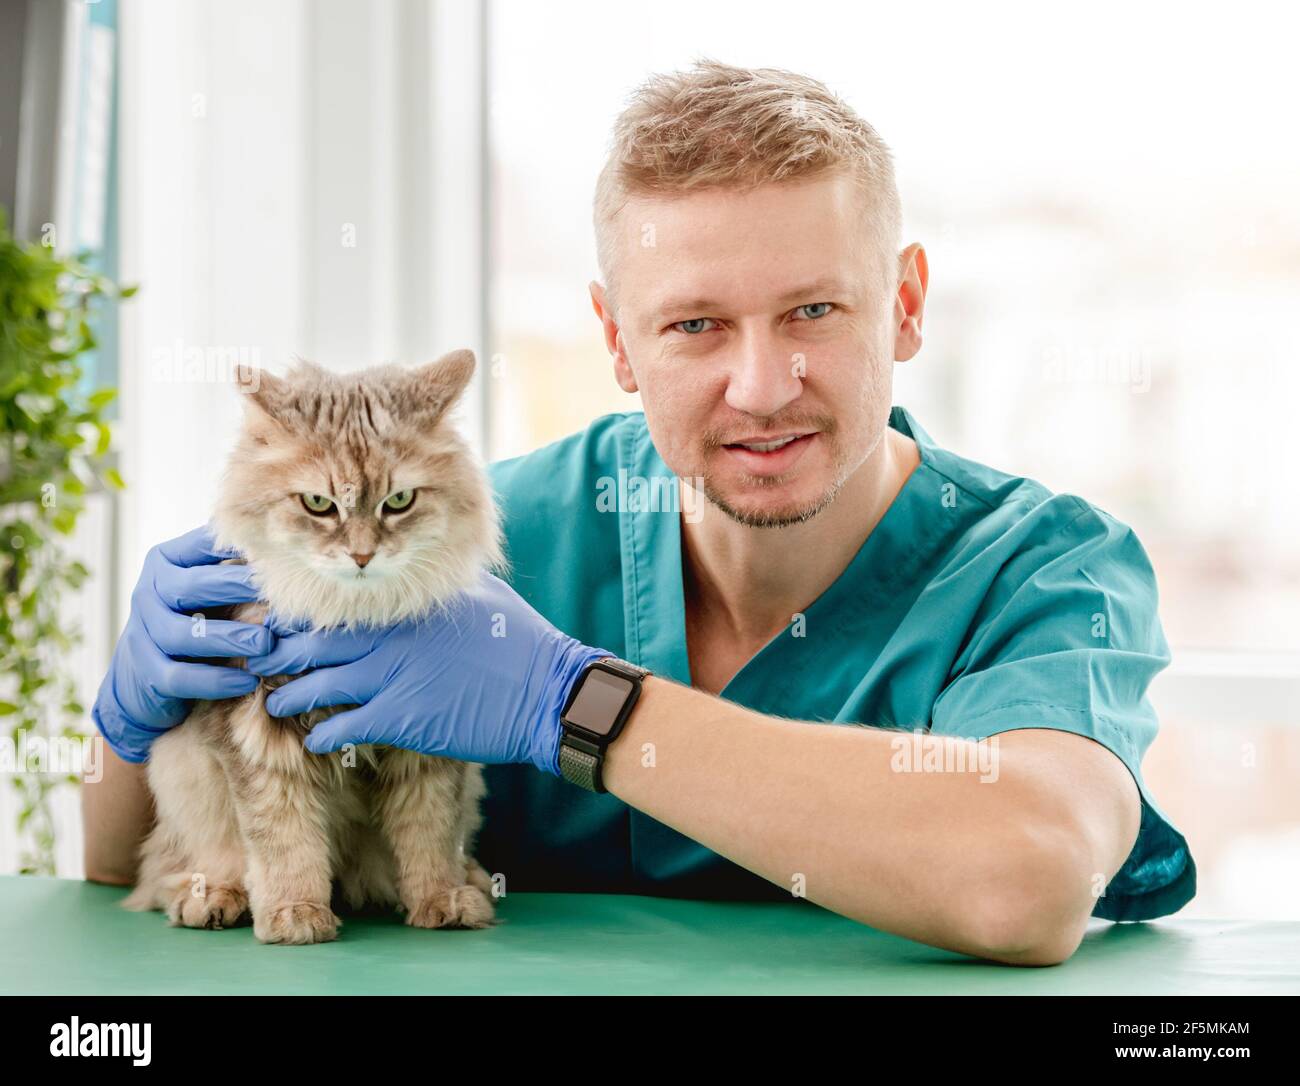 Cat During Appointment In Veterinary Clinic Stock Photo Alamy